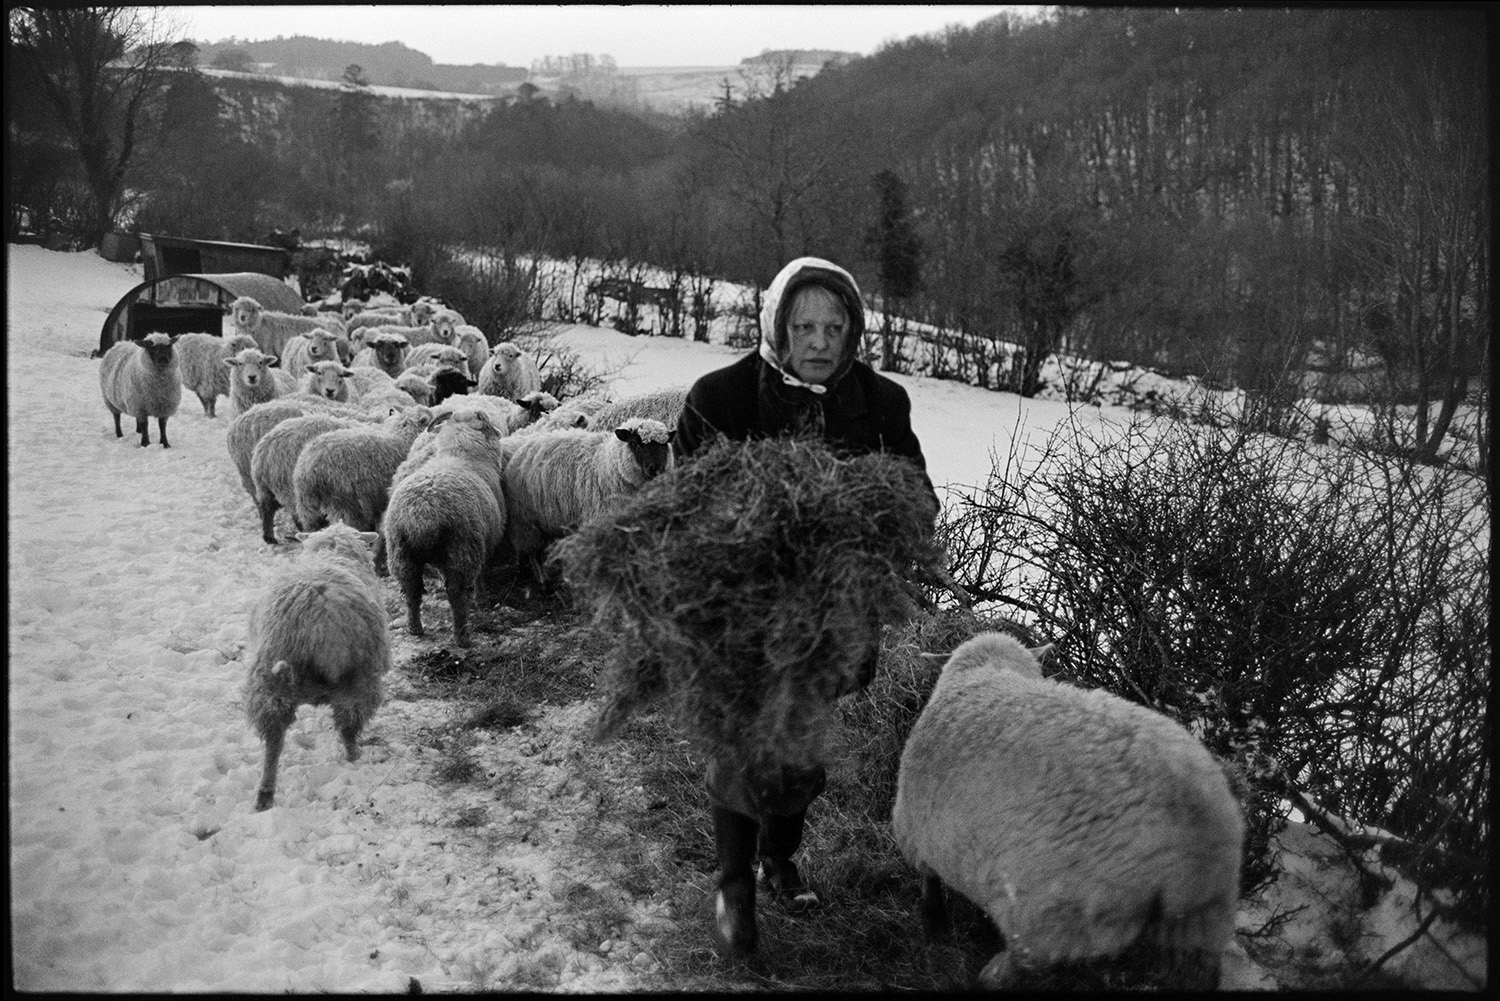 Snow, woman with donkey pulling hay on sledge and feeding sheep in field. 
[Jo Curzon feeding hay to sheep in a snow covered field at Millhams, Dolton. Woodland can be seen in the background.]